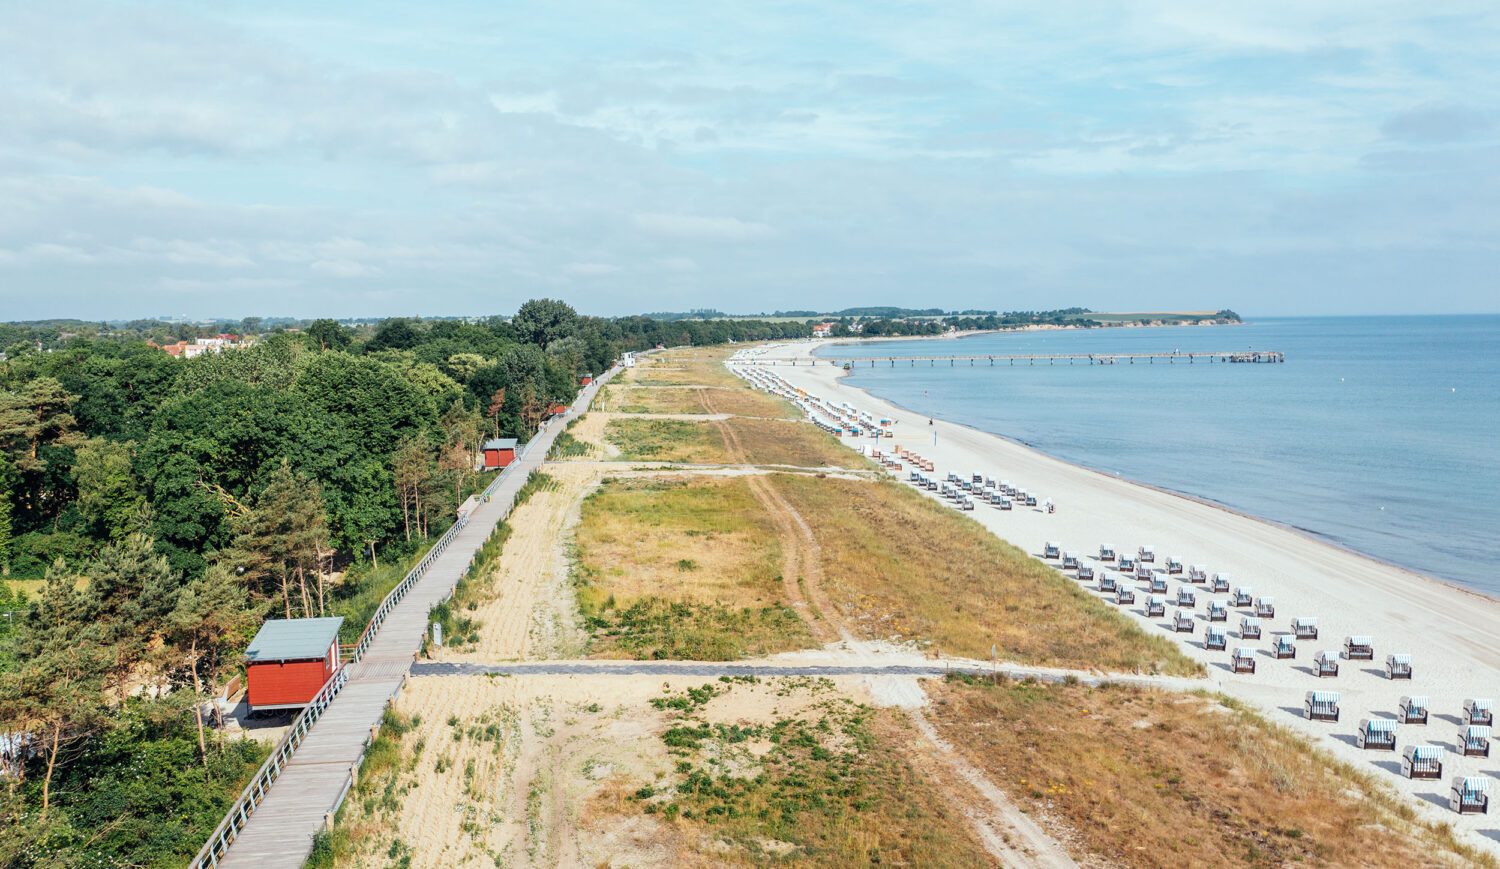 On the five kilometers long beach of Boltenhagen there are some sections reserved for nudists and dogs with their owners